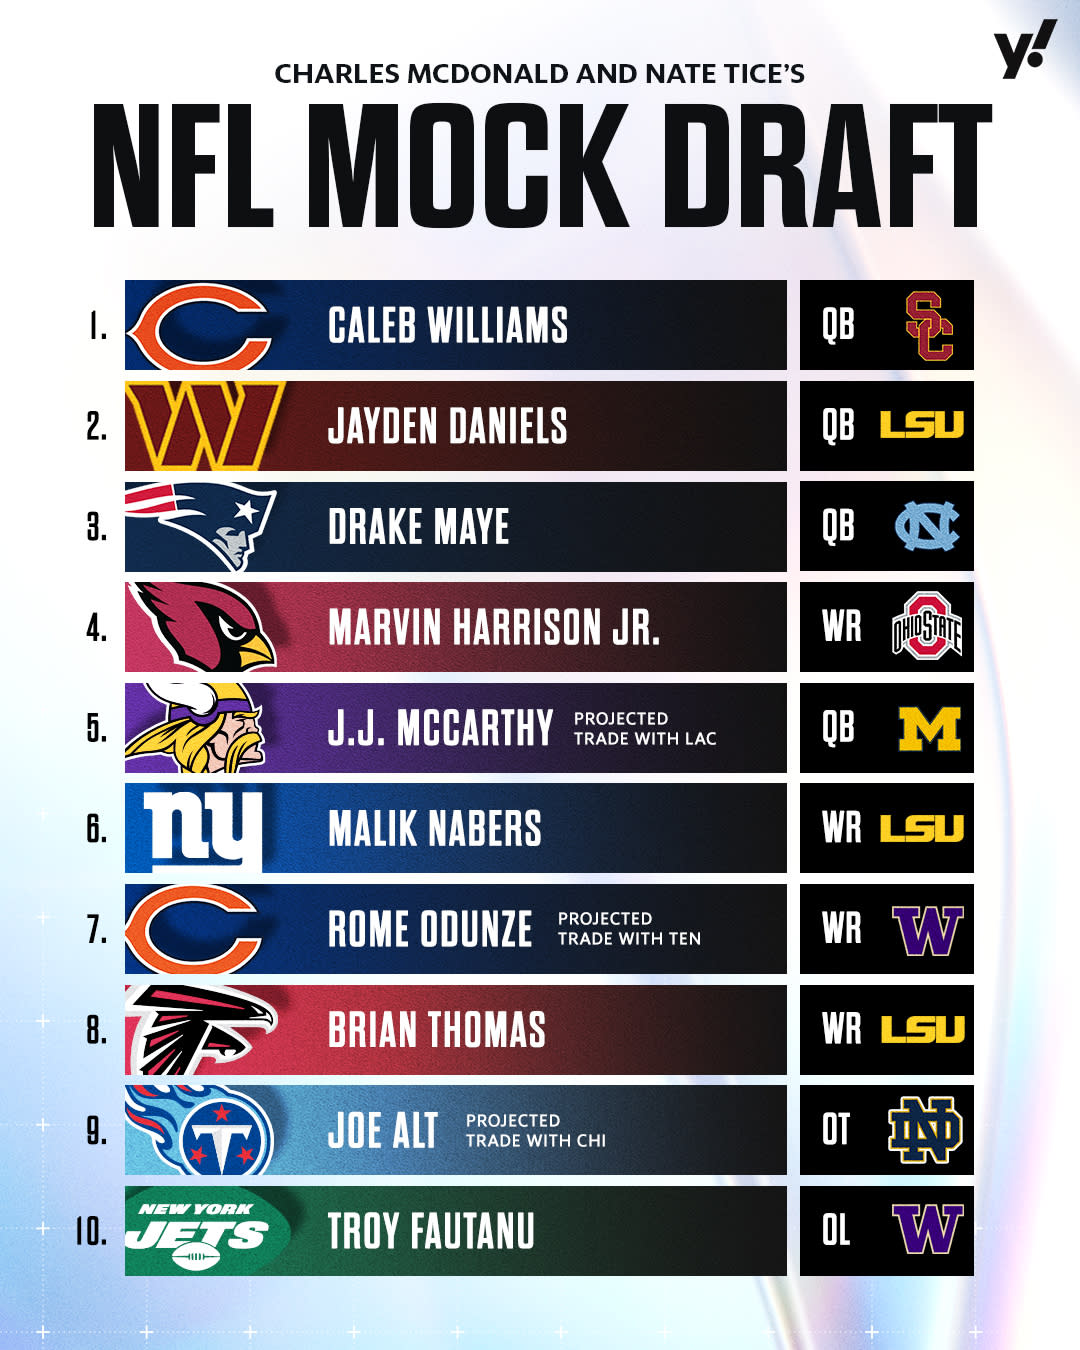 Here's the top 10 of Charles McDonald and Nate Tice's final 2024 NFL mock draft. (Taylar Sievert/Yahoo Sports)